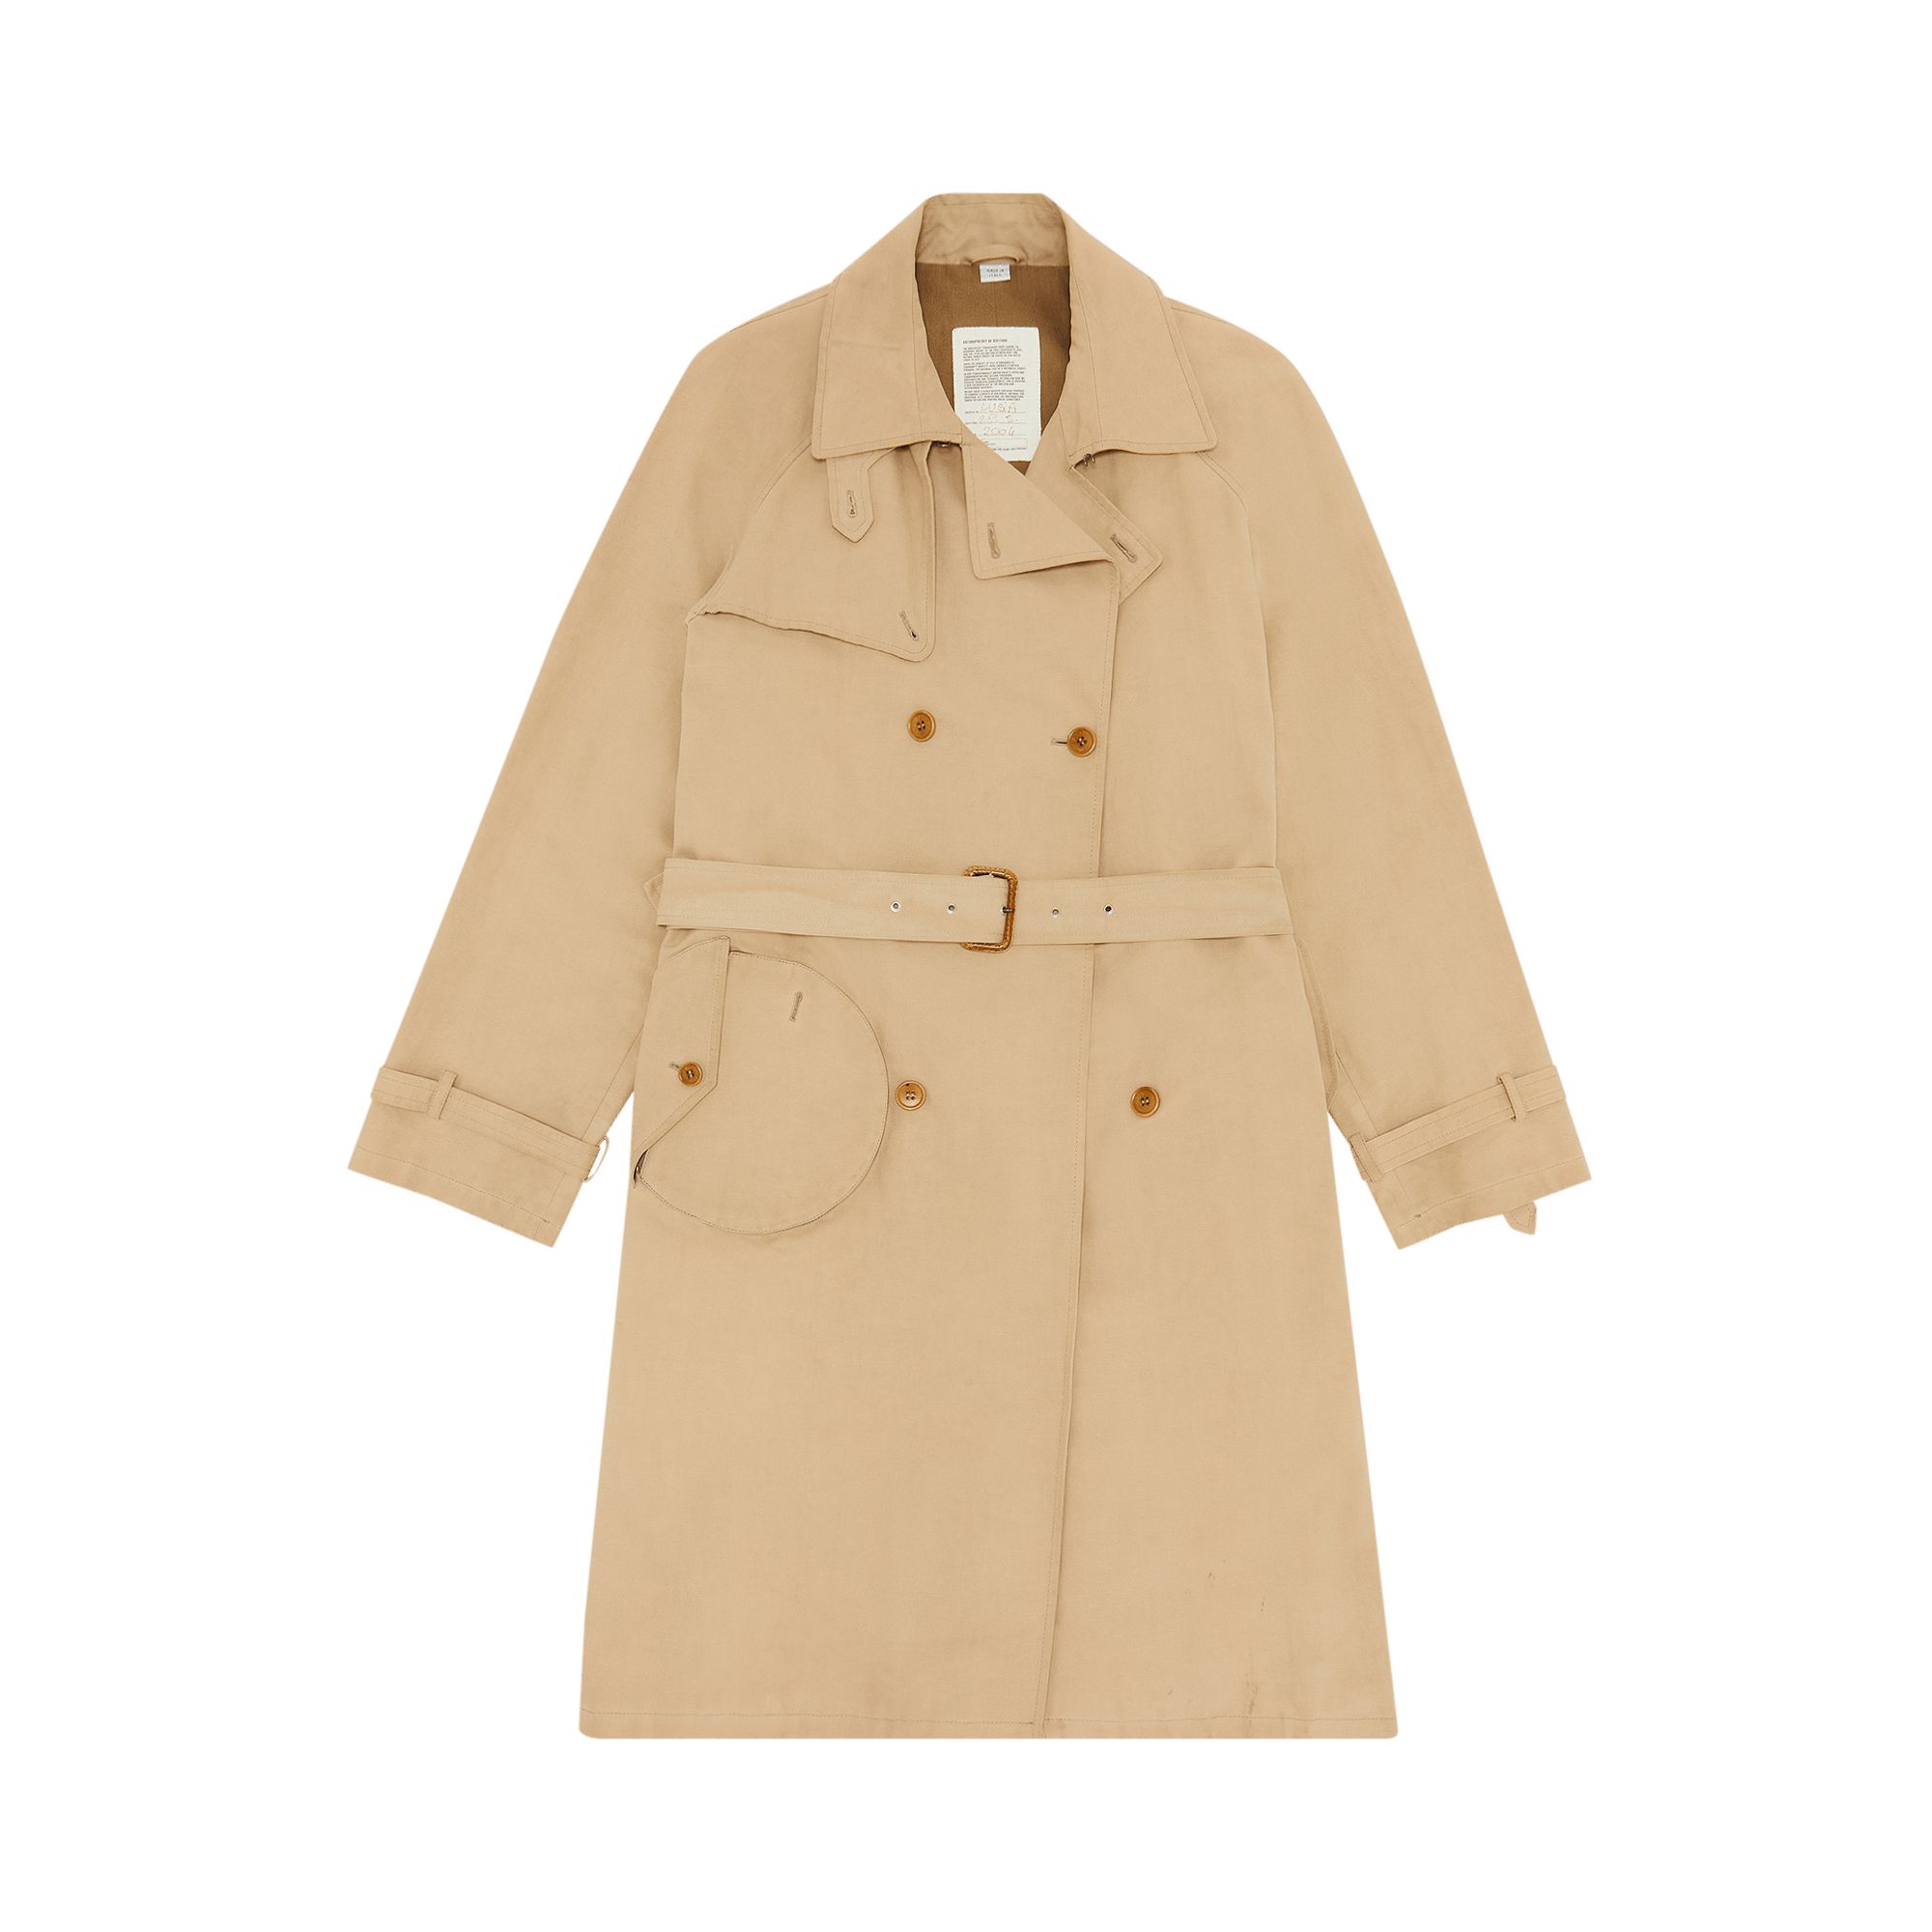 Hussein Chalayan Vintage Hussein Chalayan Double Breasted Belted Trench Coat 'Khaki' | GOAT